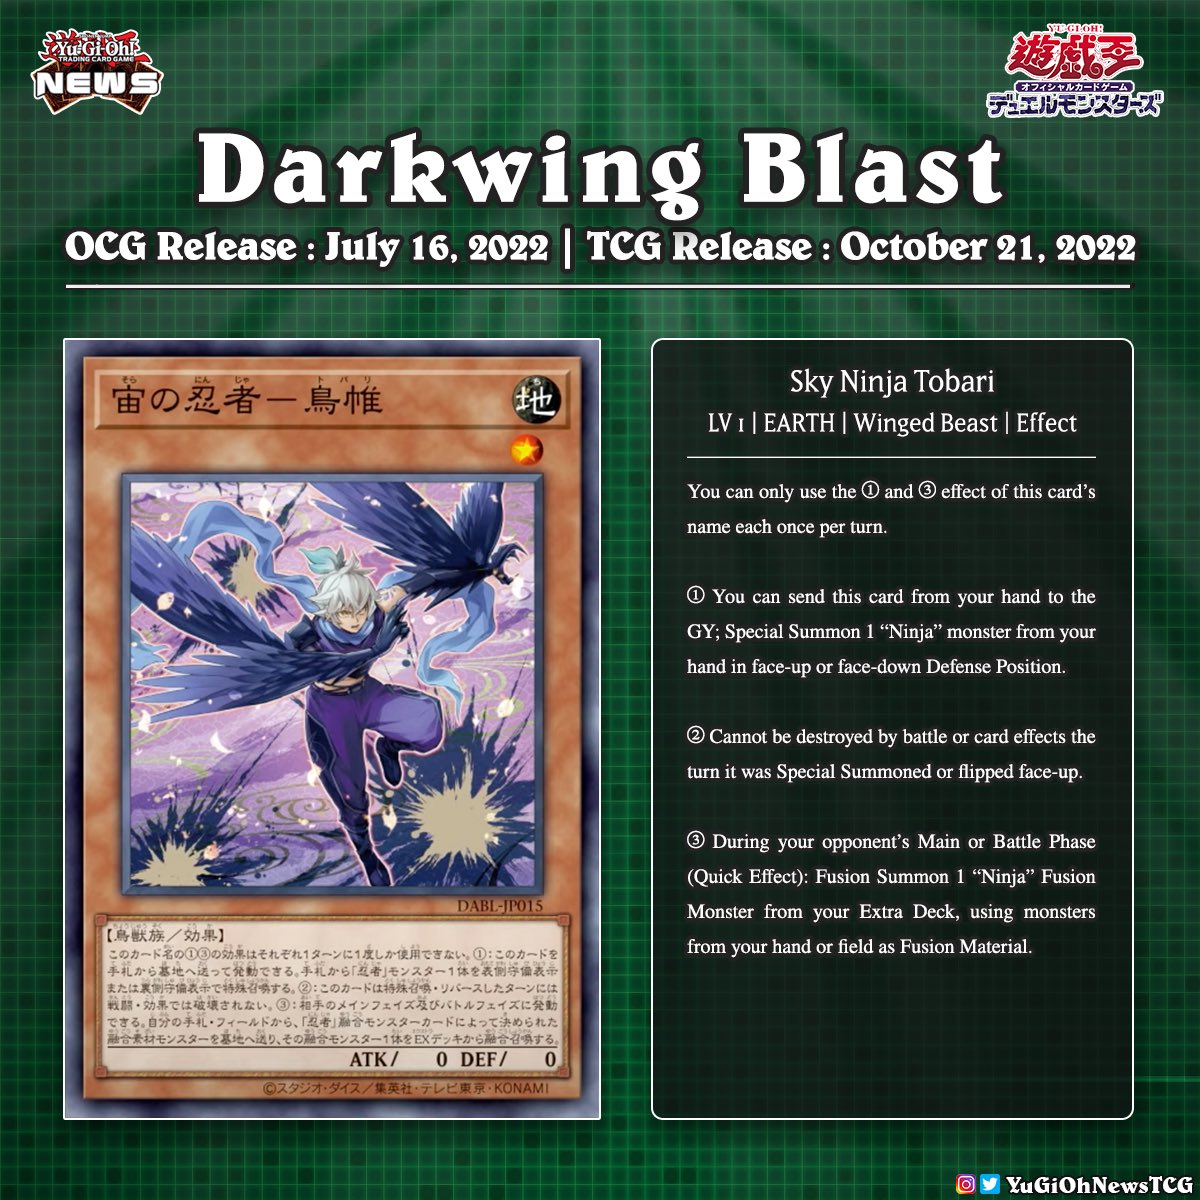 𝗗𝗮𝗿𝗸𝘄𝗶𝗻𝗴 𝗕𝗹𝗮𝘀𝘁❱ The upcoming core set “Darkwing 